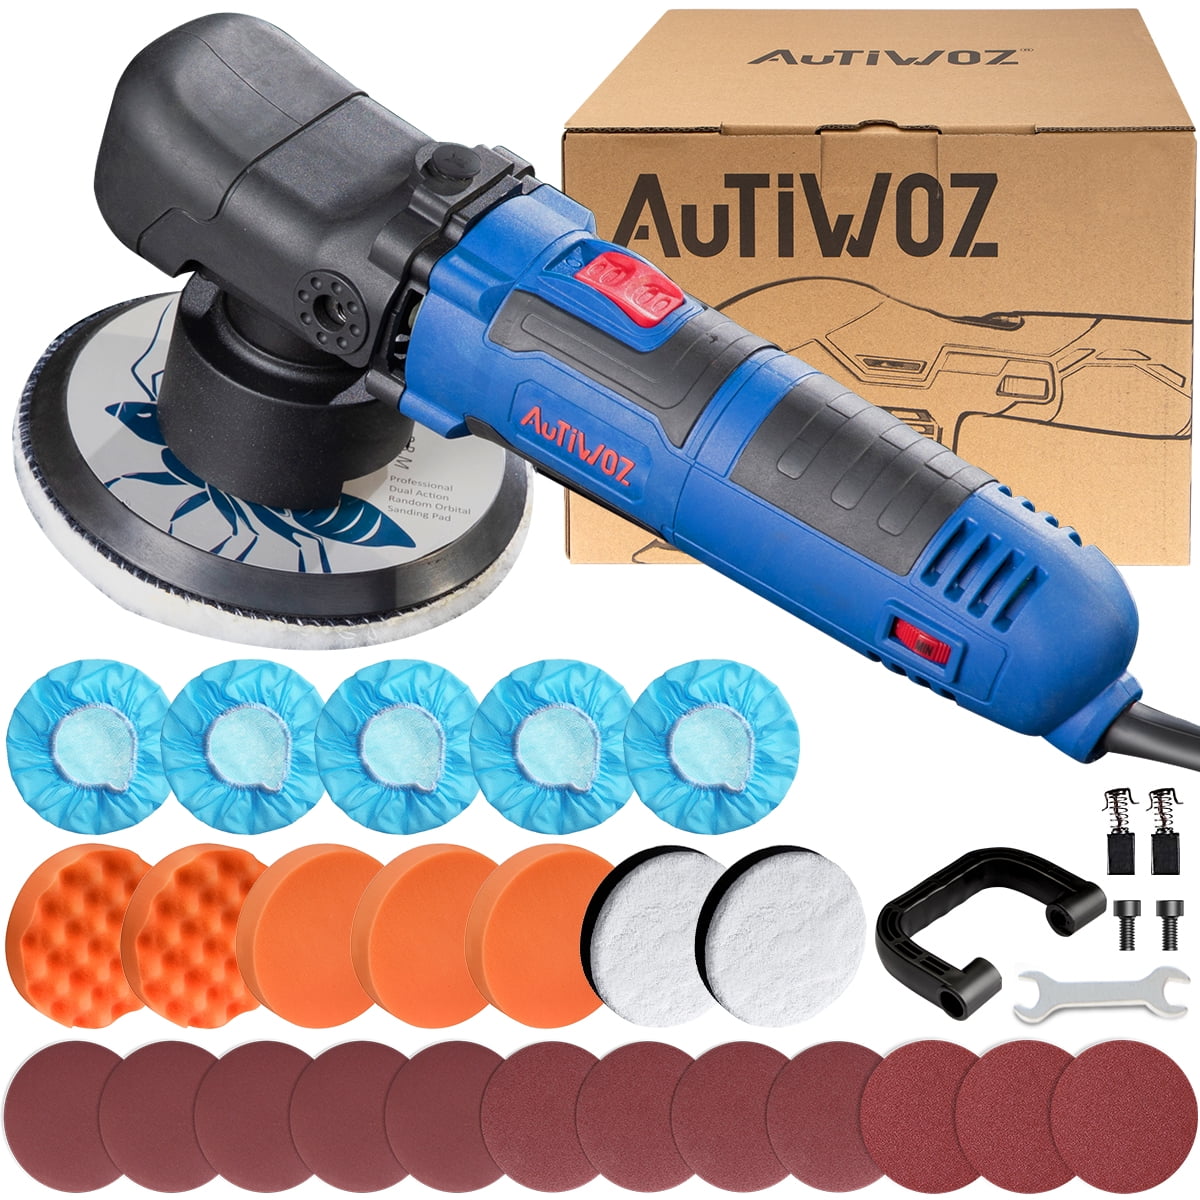 Wizards Car Buffers and Polishers Kit with 21 mm HD Big Throw - Ergonomic  Design Dual Action Orbital Polisher and Car Scratch Remover - Car Detailing